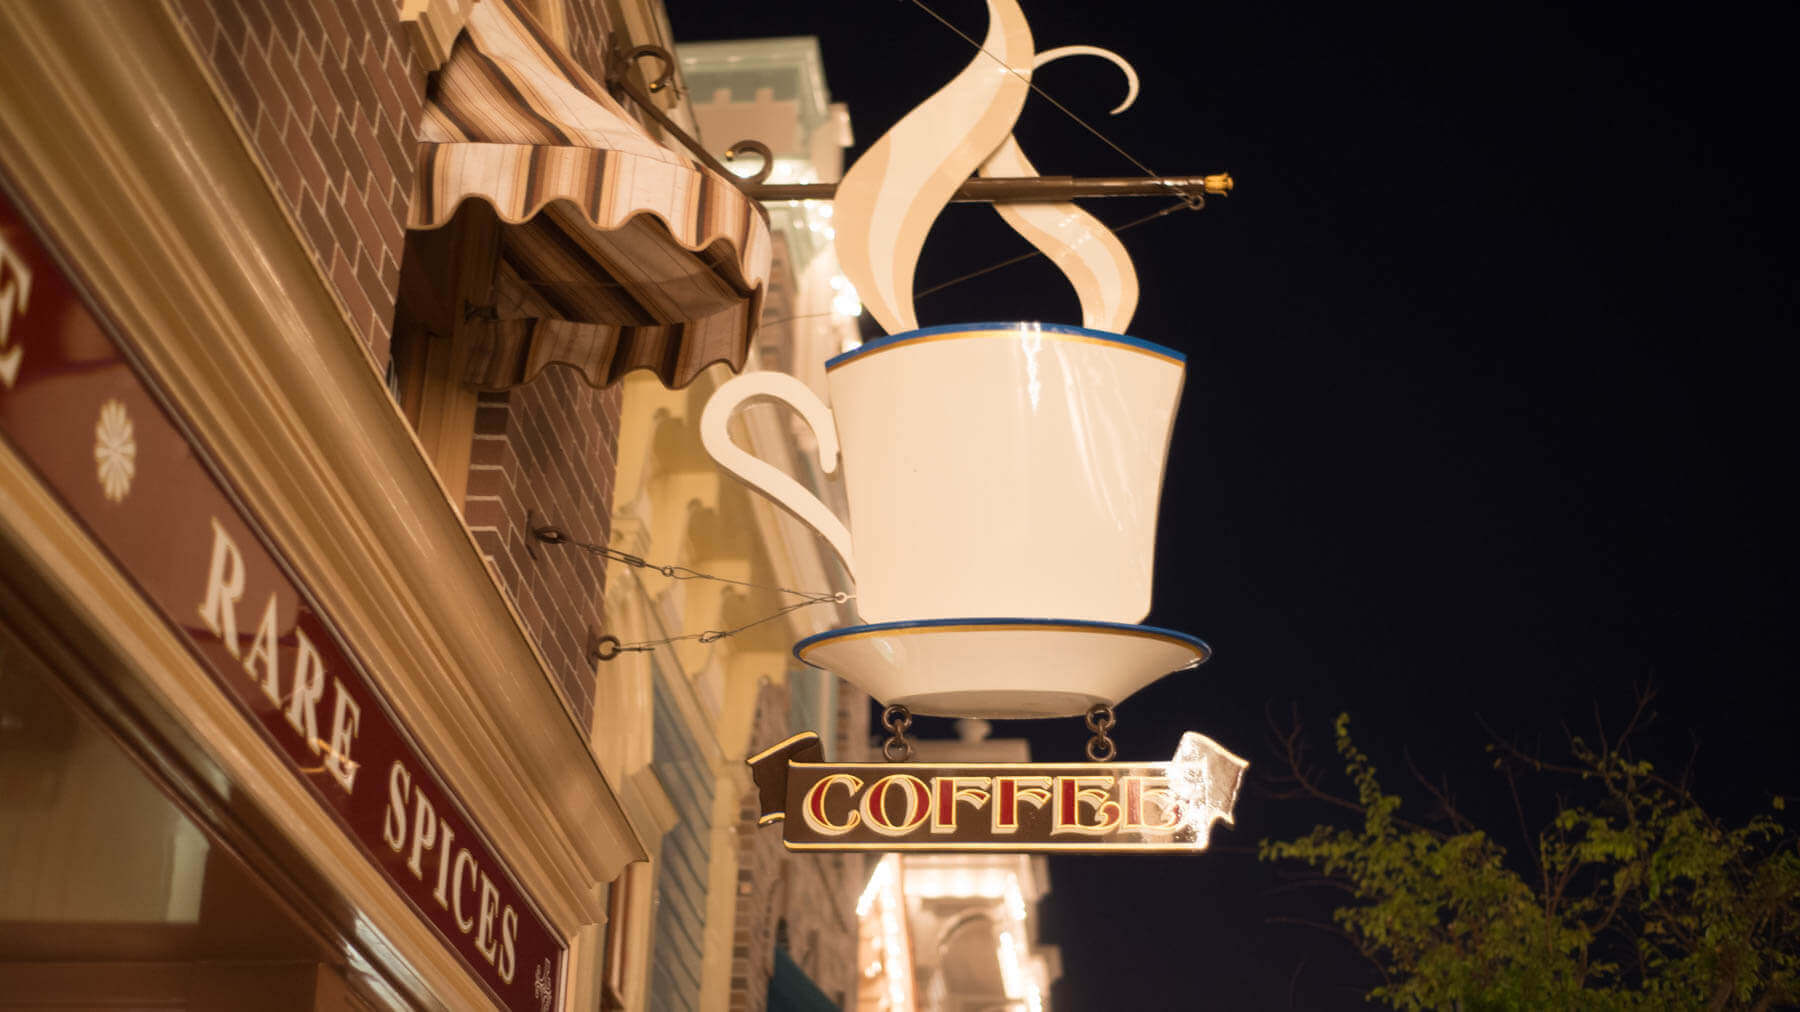 Where to Find Good Coffee at Disneyland